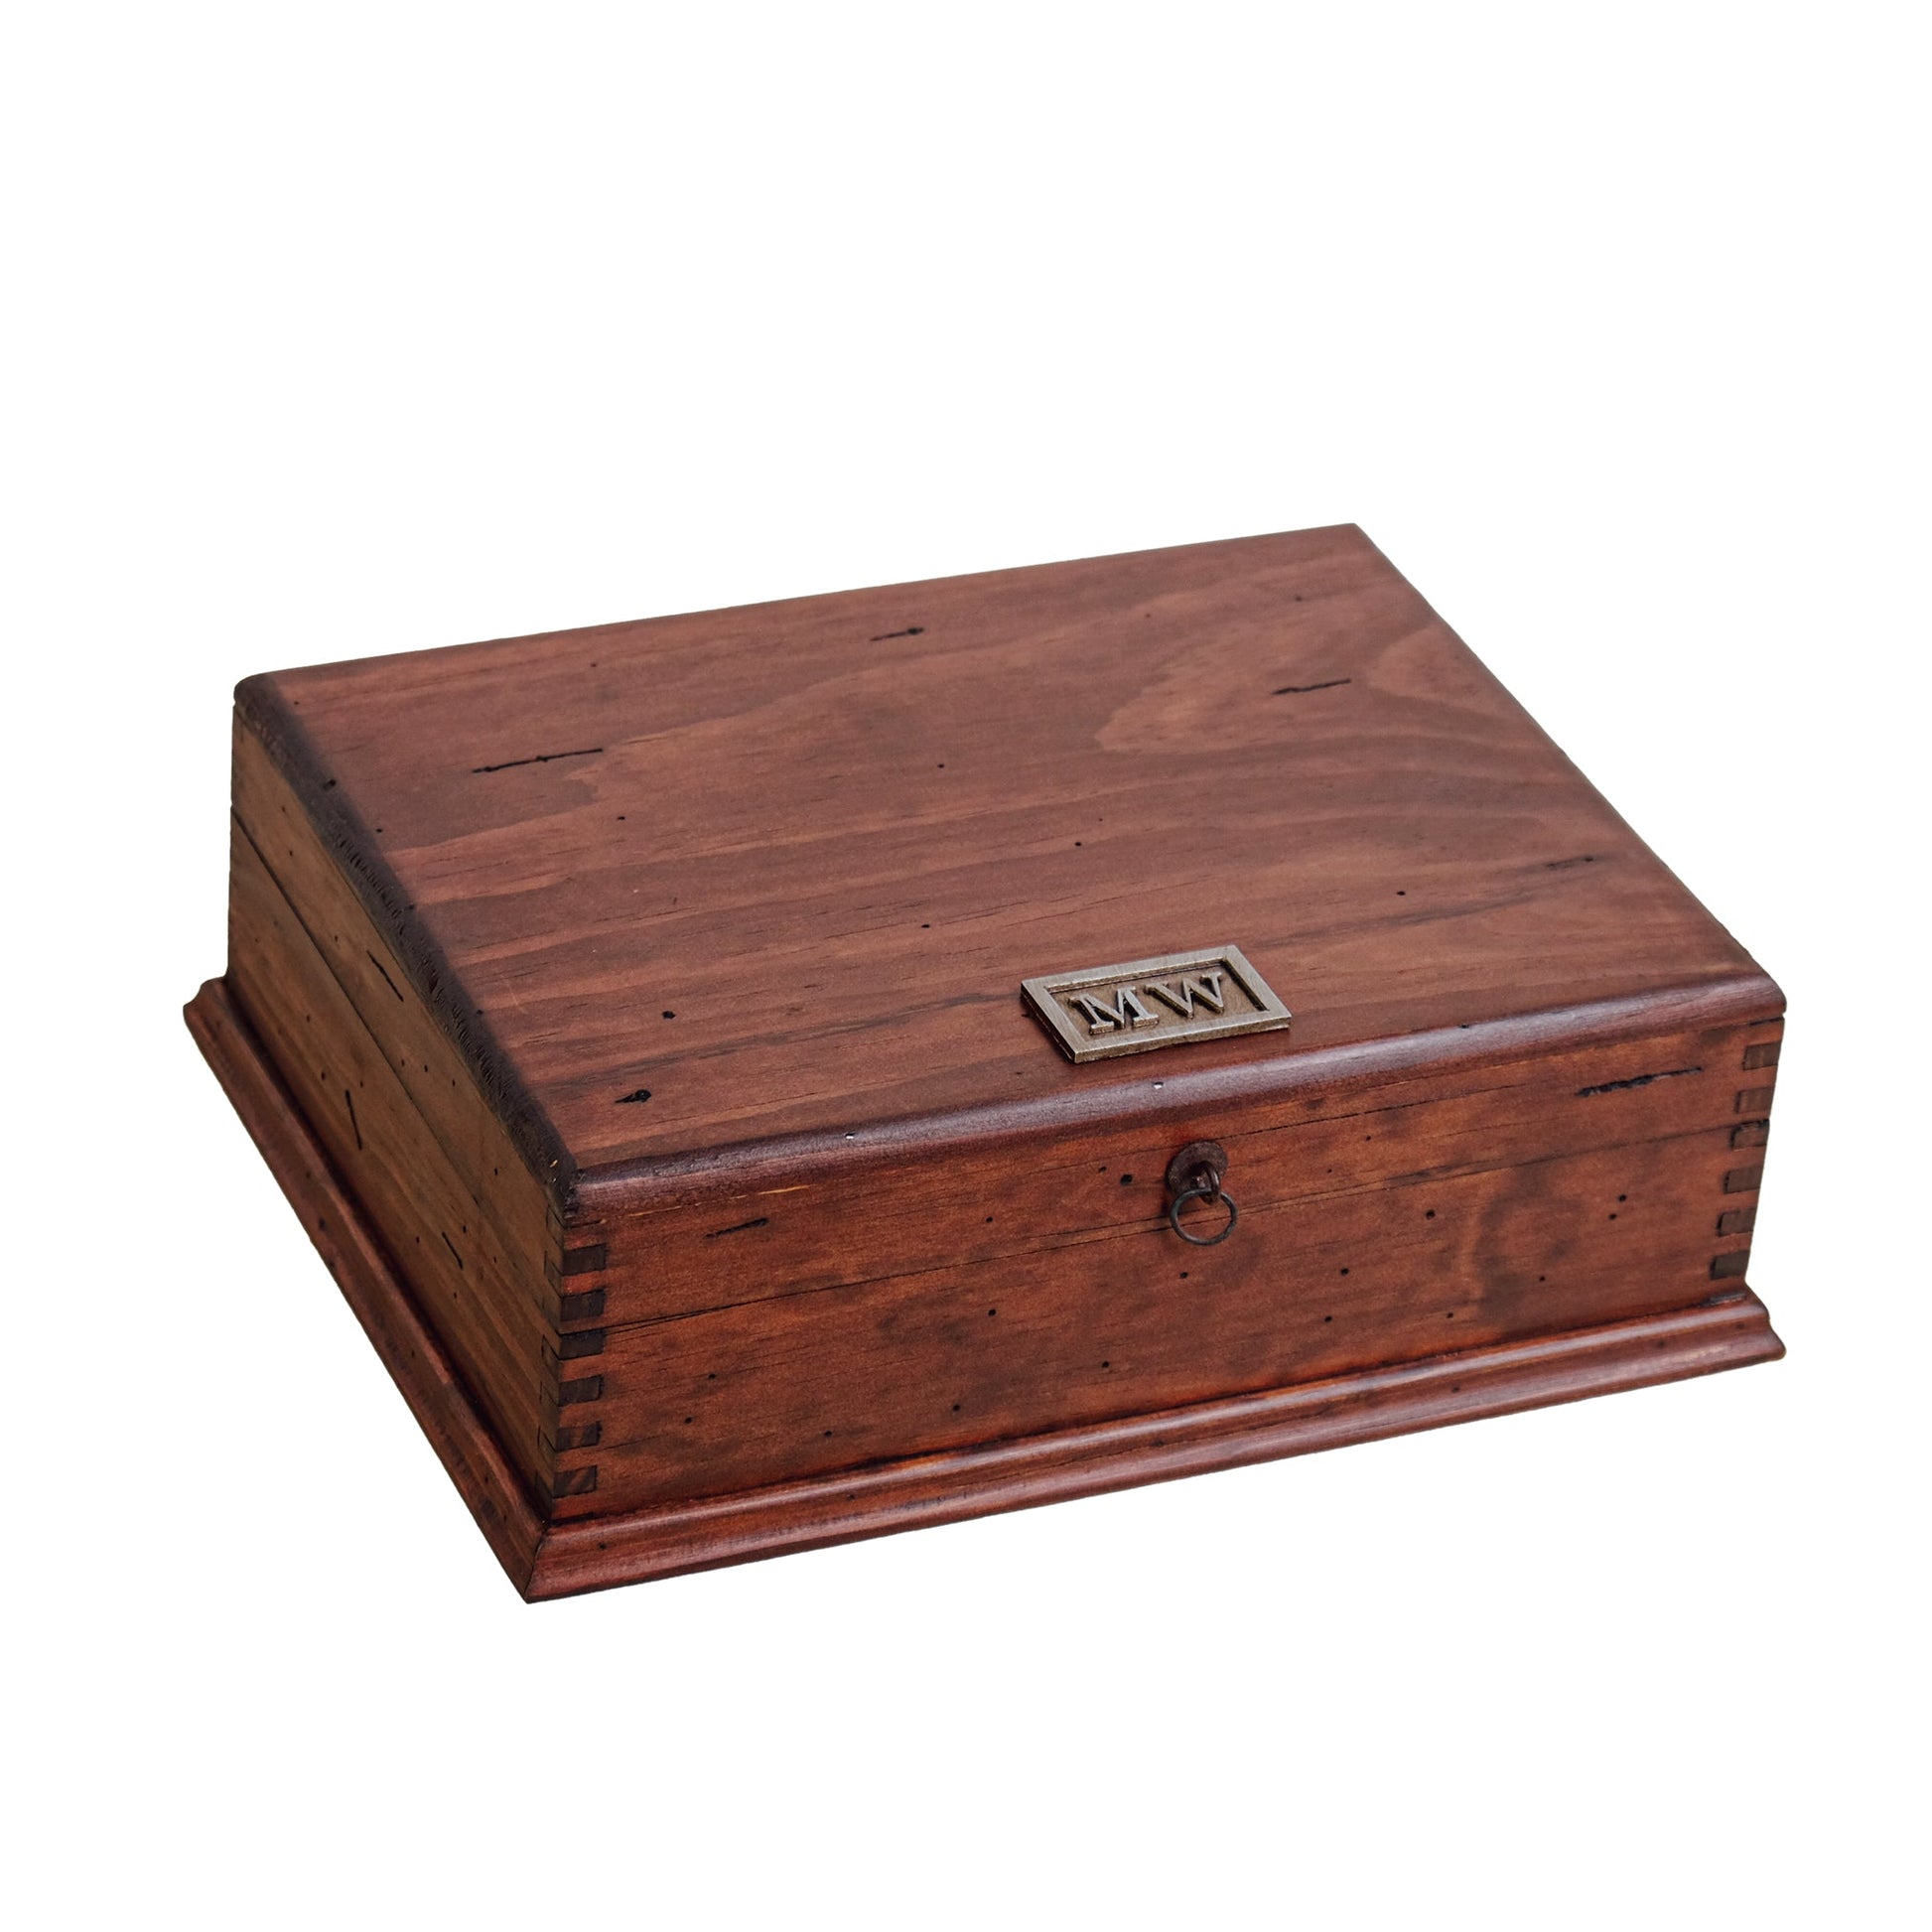 Rustic Watch Box for 8 Watches - Slim Design - Removable Tray - Deferichs